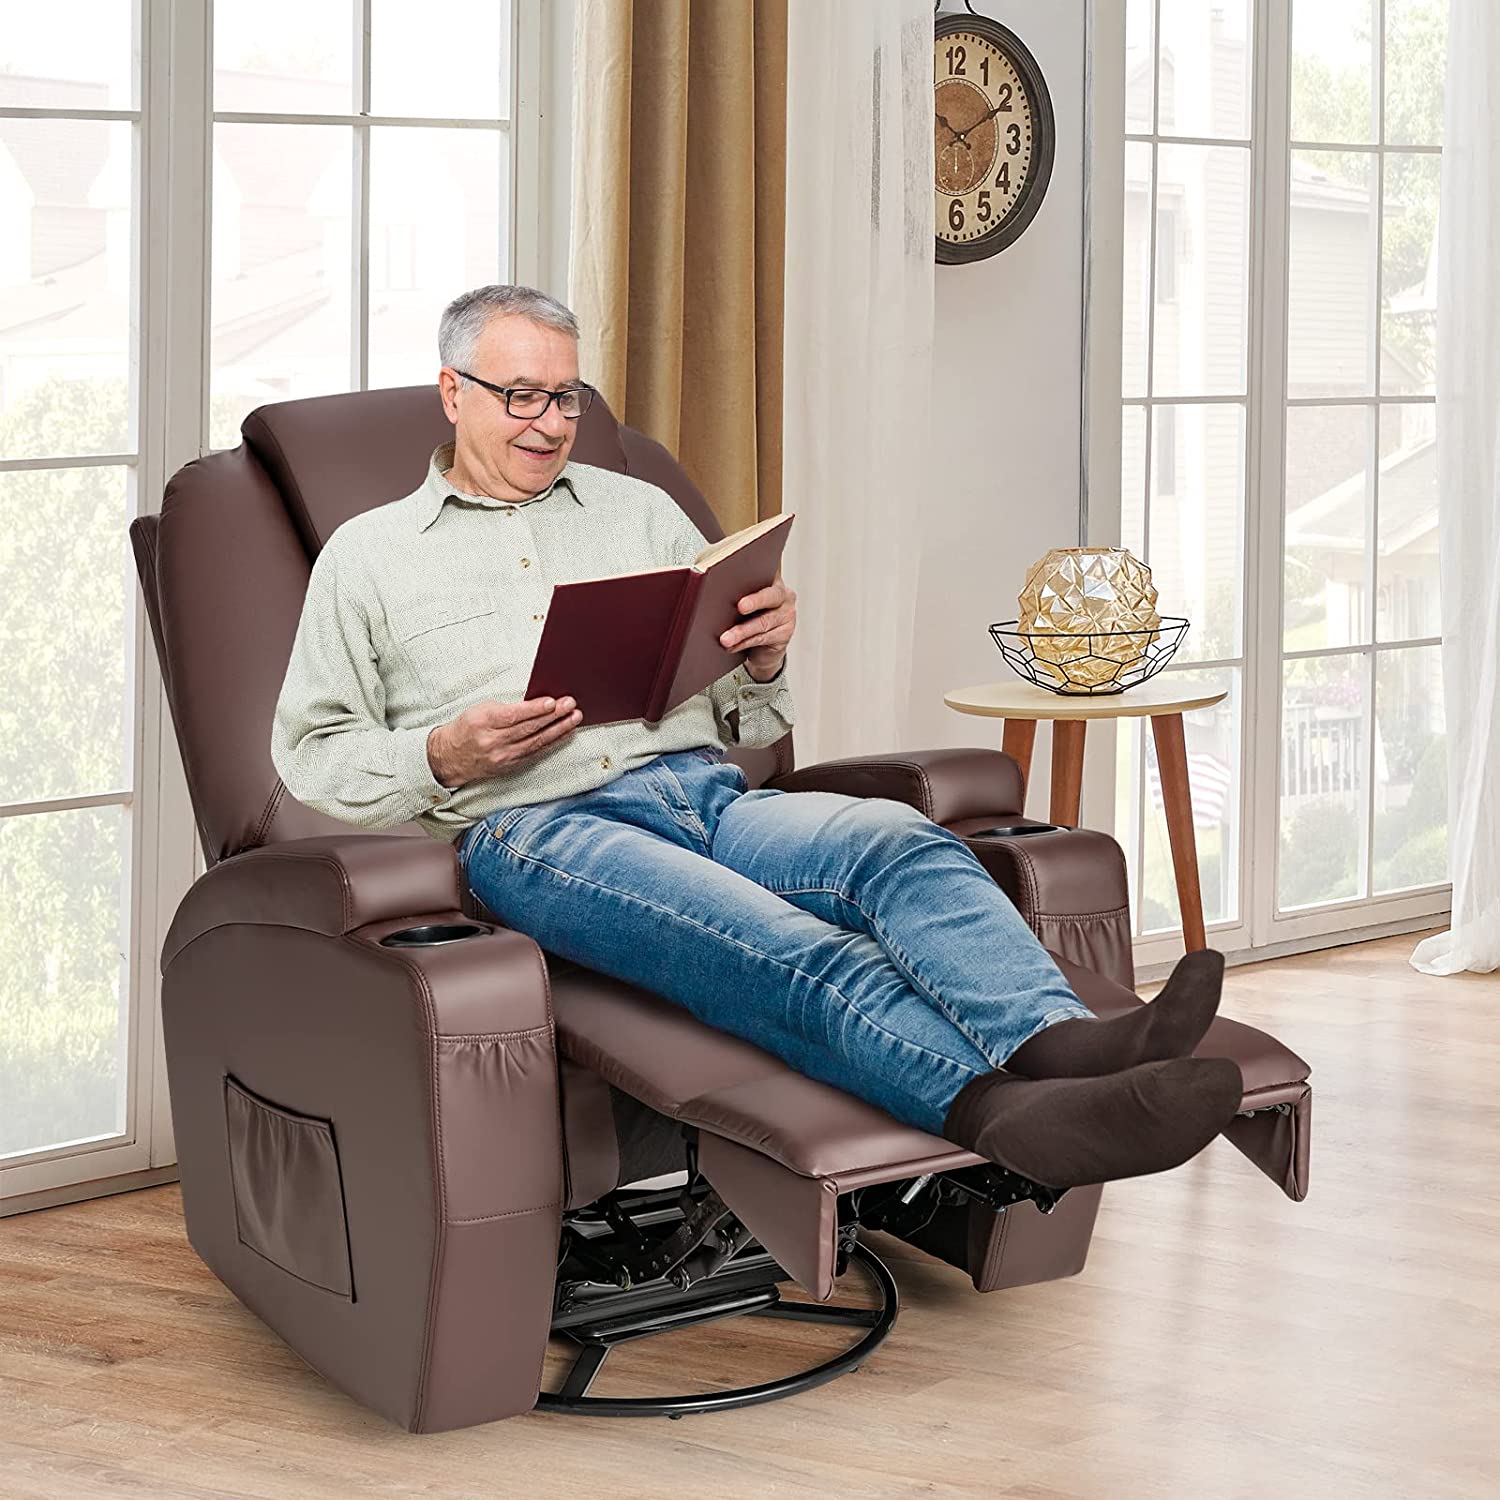 Chairliving 360 Degree Swivel Massage Recliner Chair Leather Glider Rocker Lounge Chair with Remote Control Lumbar Heating for Nursery